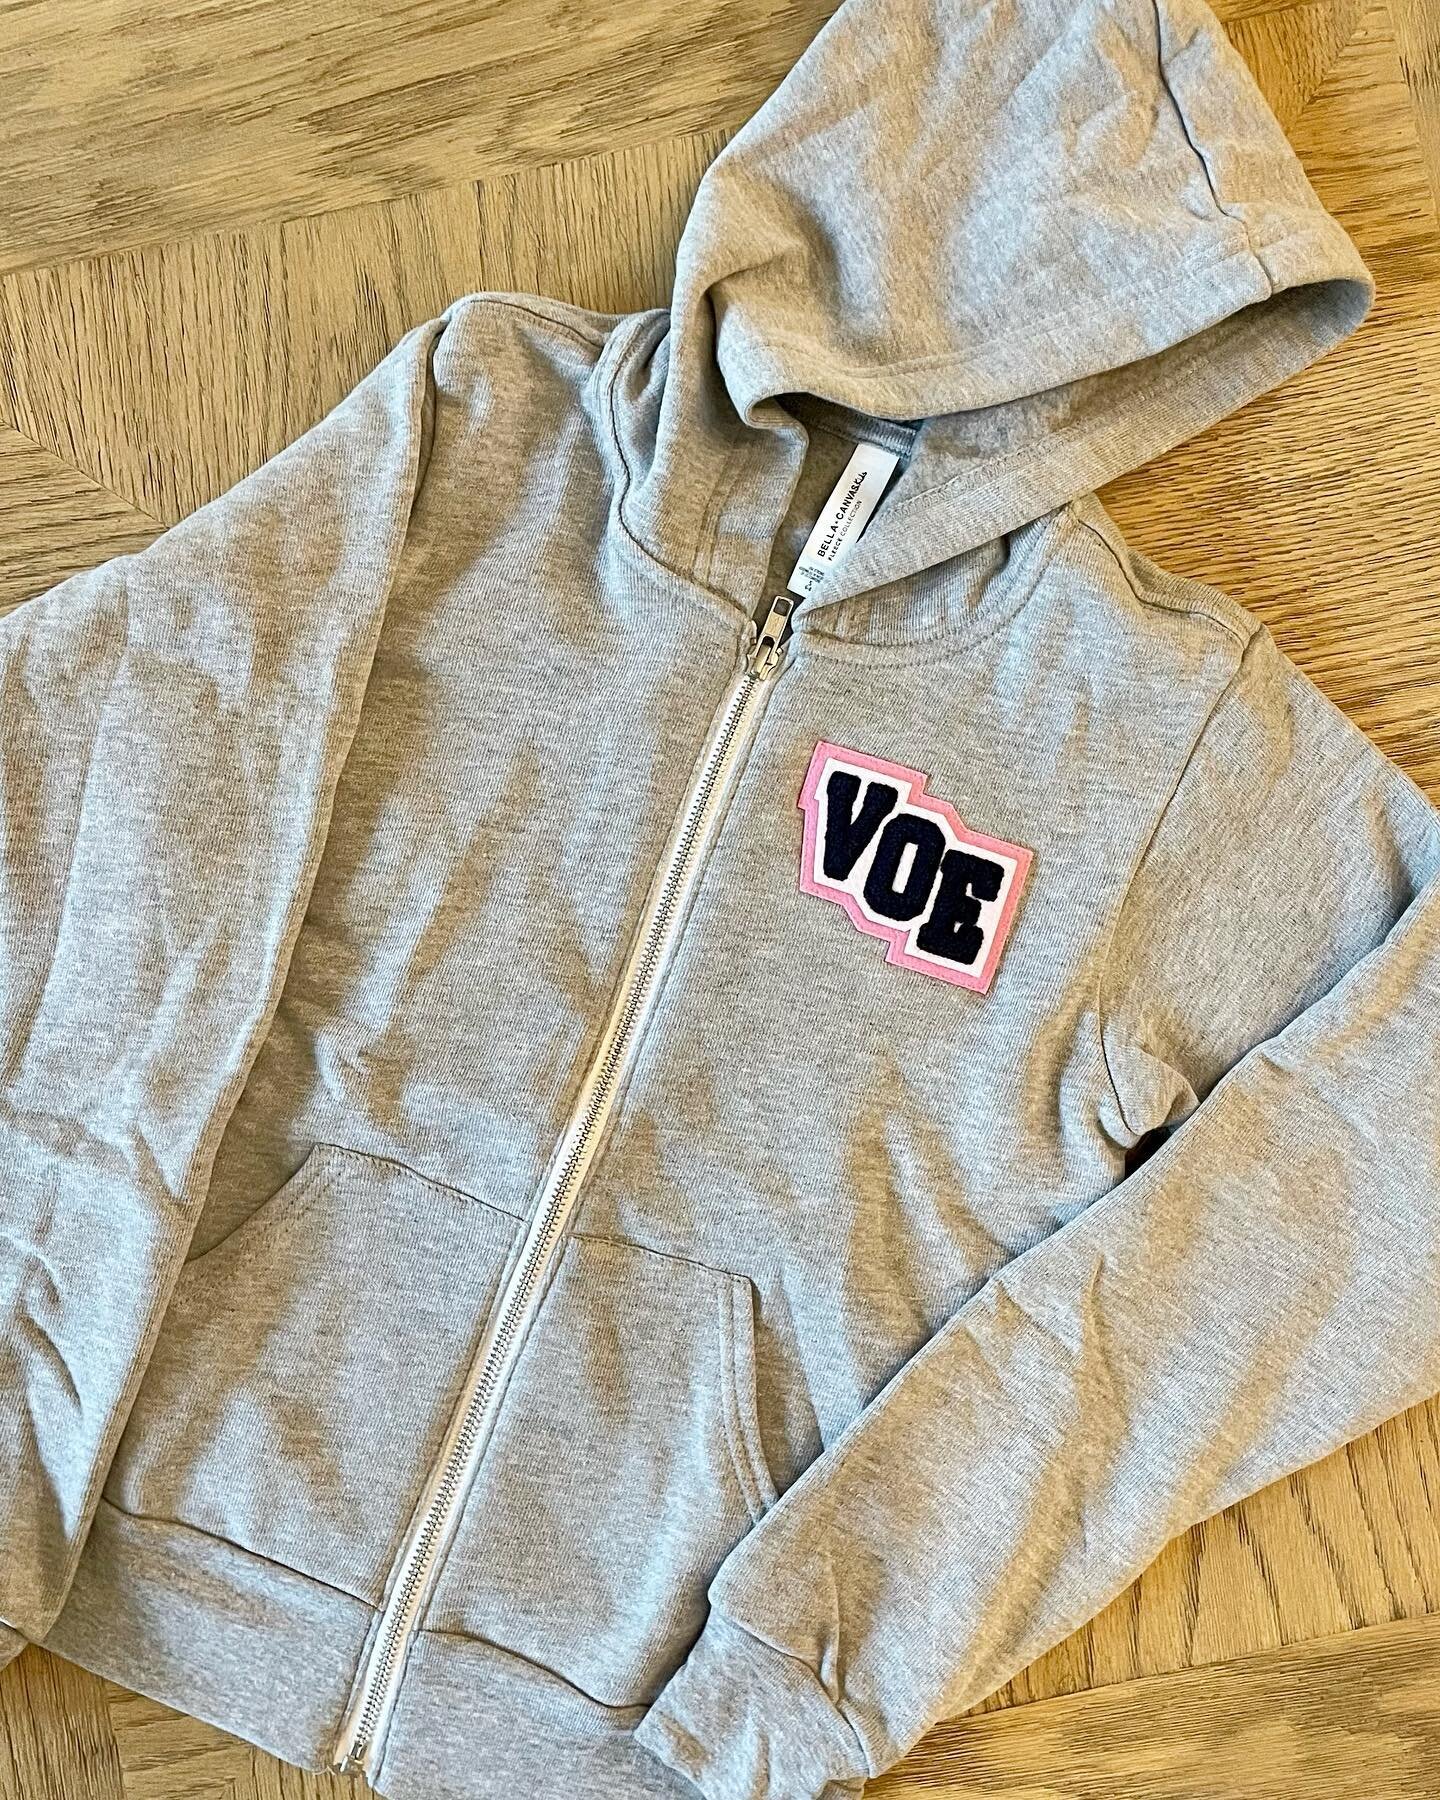 Chenille patches have been my favorite new addition this year! I love these simple but so cute VOE hoodies.